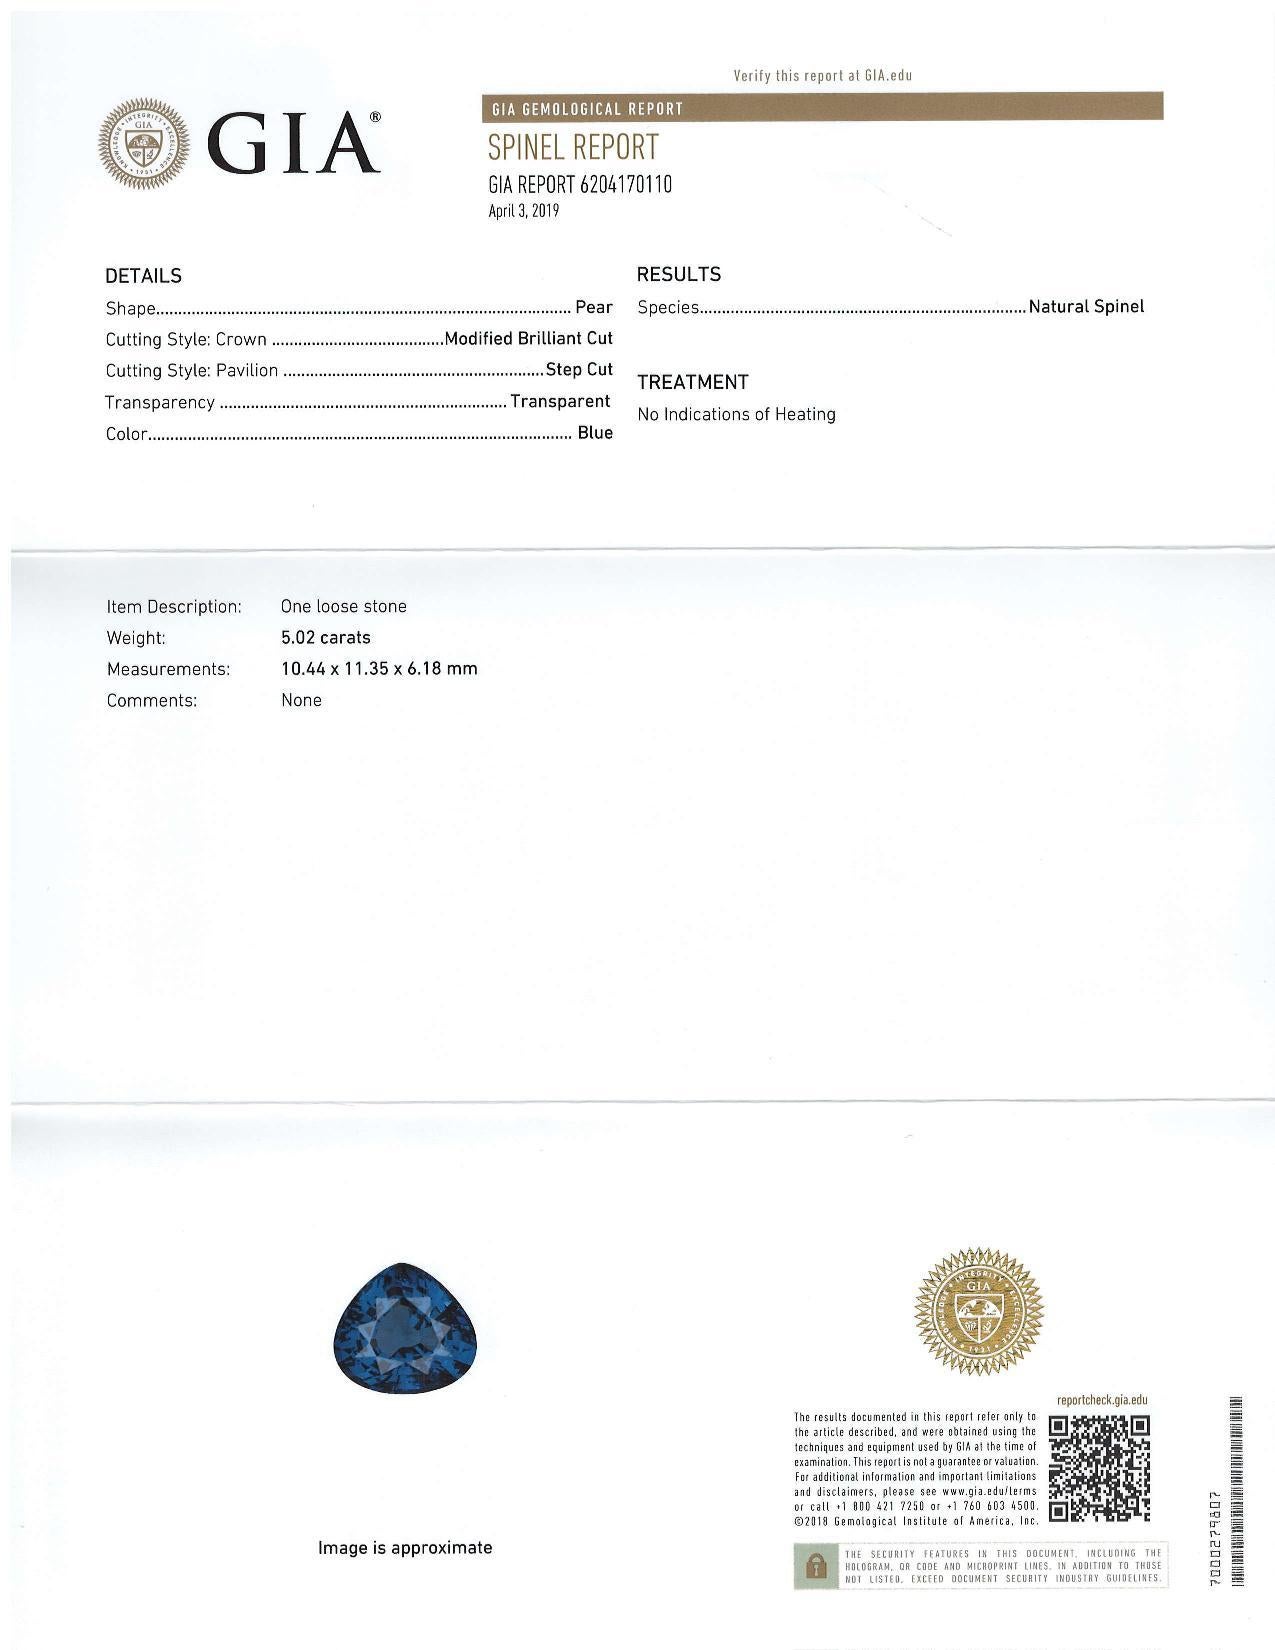 This unheated blue spinel has exceptional brilliance and luster! Accompanied by Gemological Institute of America Report #6204170110, this gem weighs 5.02 carats and measures 10.44 x 11.35 x 6.18 millimeters. It is a nicely rounded pear shape and a